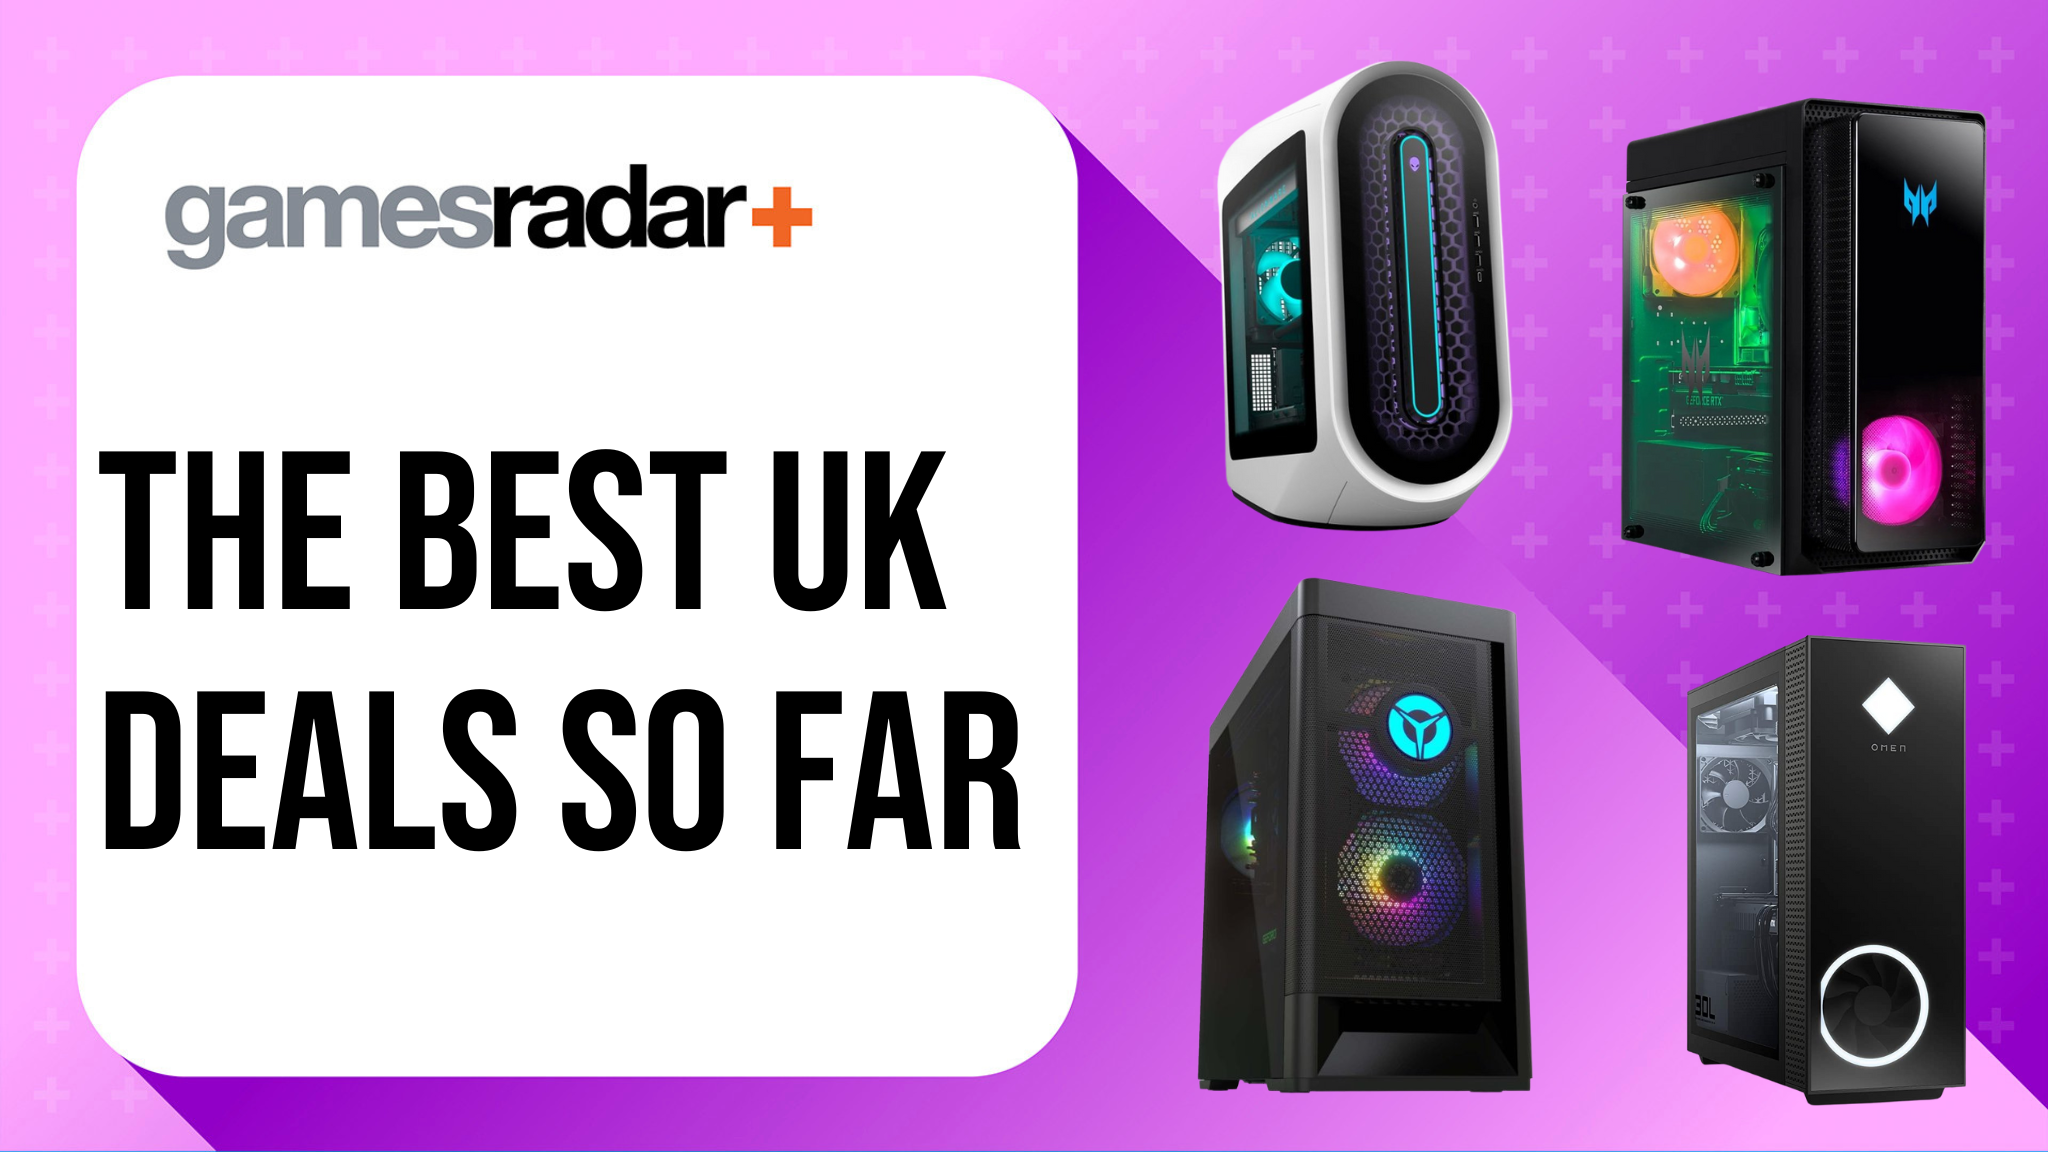 Black Friday gaming pc deals live best so far in the UK